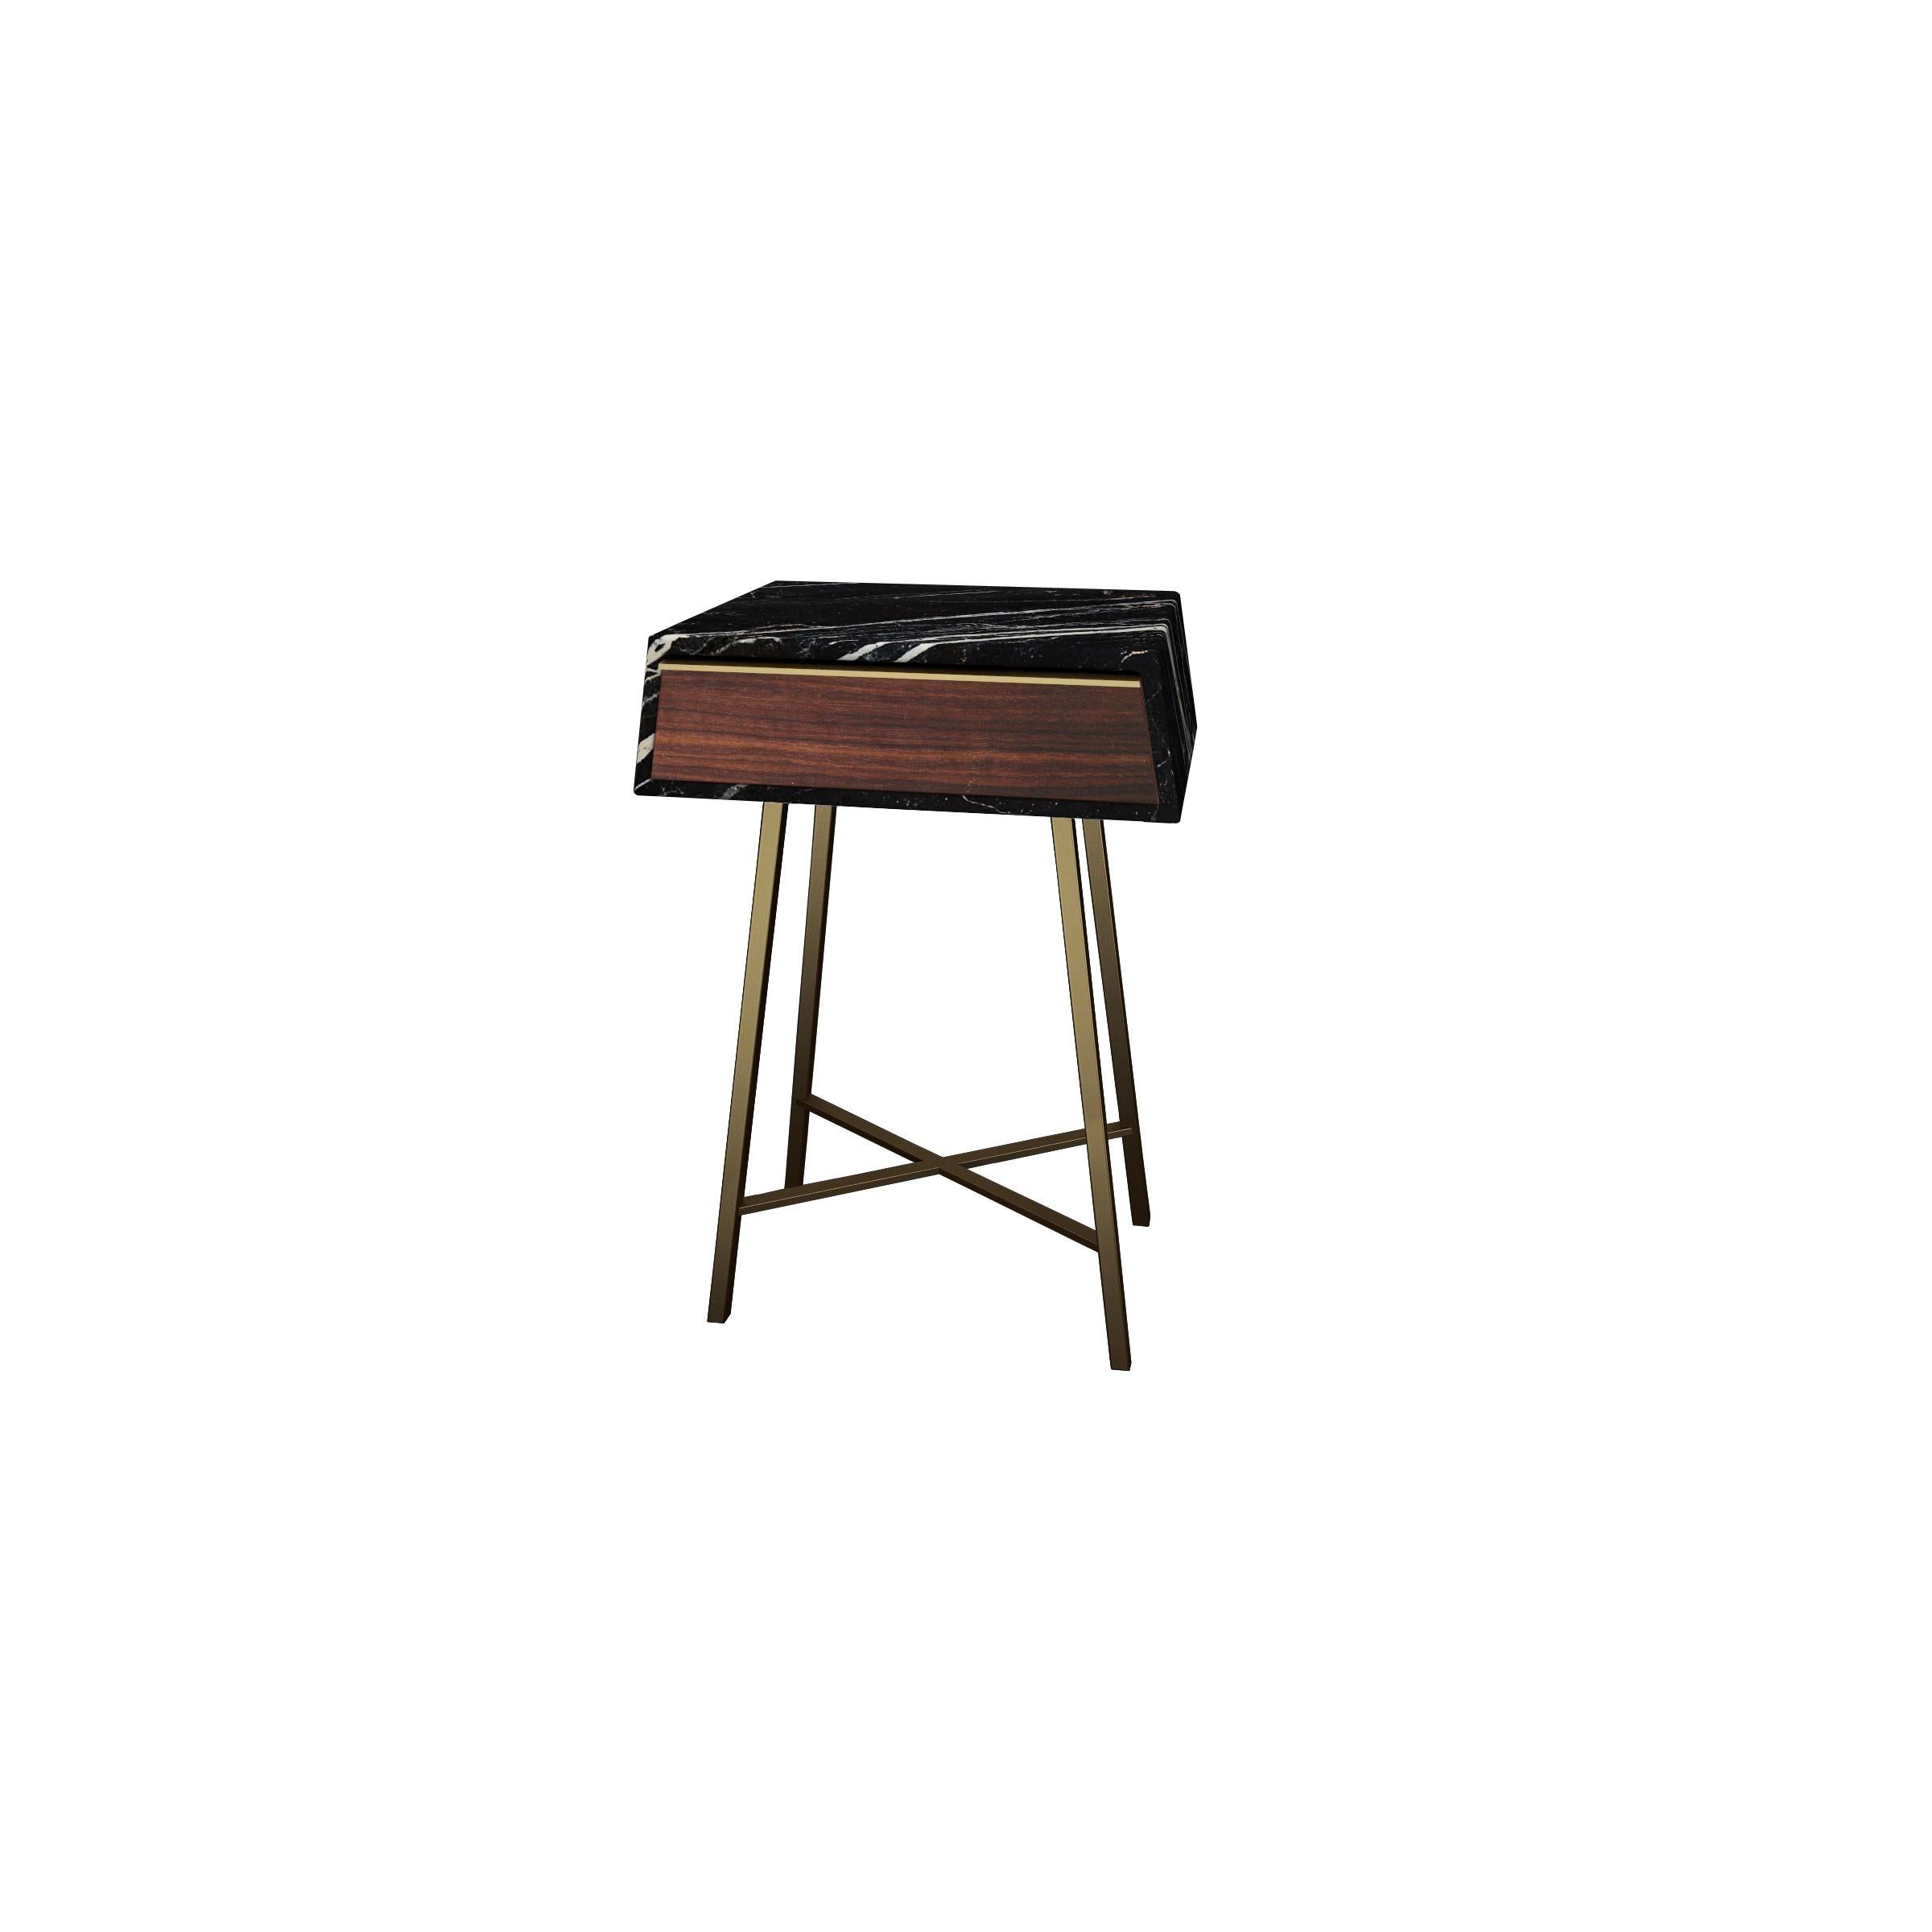 𝗣𝗿𝗼𝗱𝘂𝗰𝘁 𝗗𝗲𝘁𝗮𝗶𝗹𝘀:
Console table made with solid marble slabs with a more retro design. The spacious drawers are made in stained oak and have been installed with a smooth auto closing system, enhancing the continuous usage of the